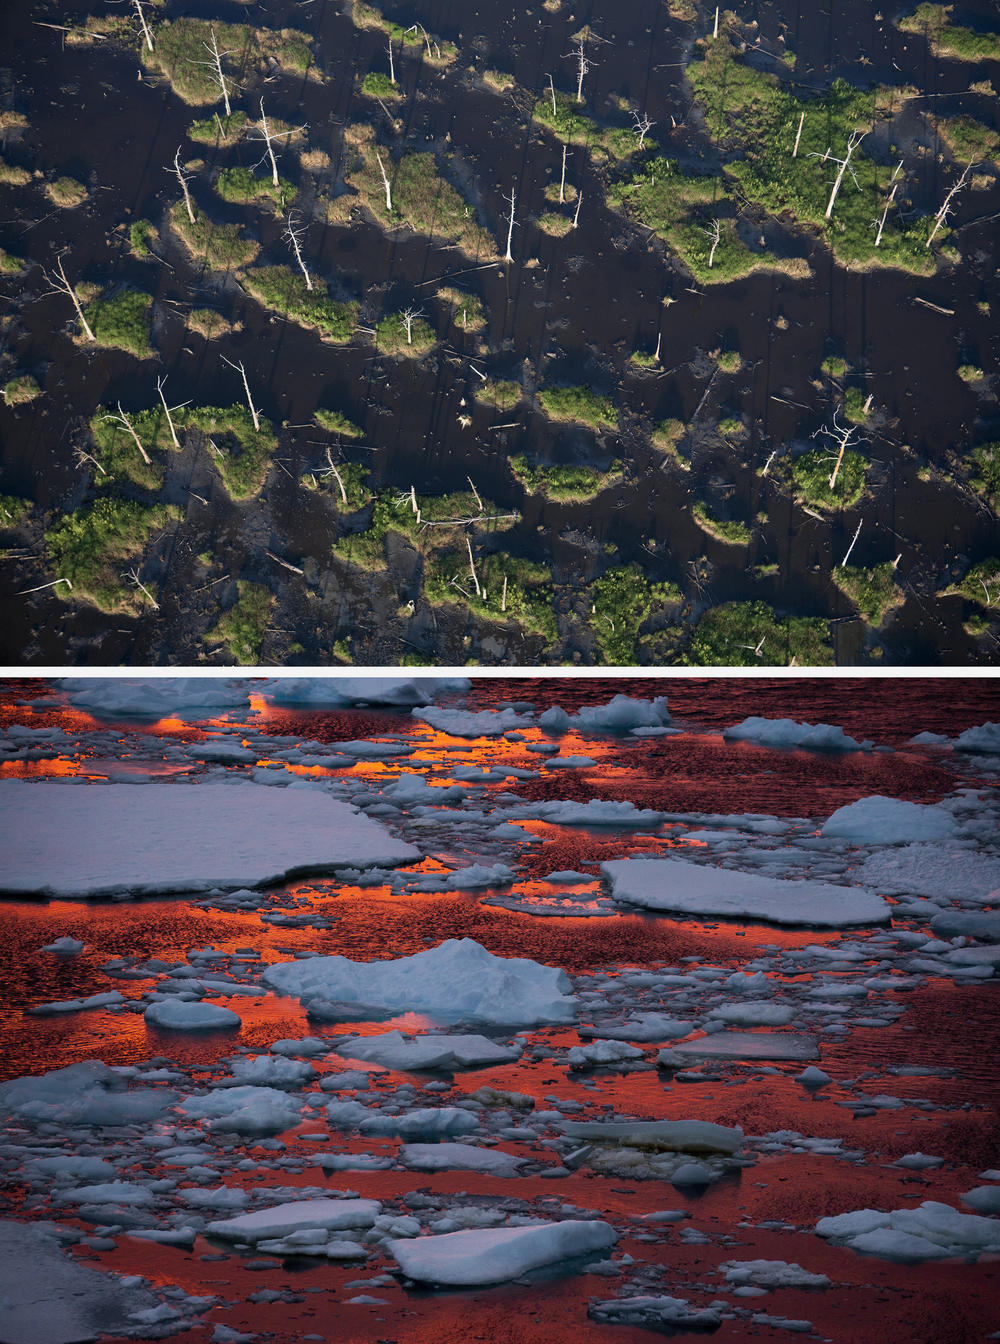 (Top image) A May 2006 aerial view of marshlands near Empire, La. Since the 1930s, the state has lost about 2,000 square miles of land, the highest rate of land loss in the United States. (Bottom image) The warm light of an Antarctic sunset bathes sea ice floating in the Lemaire Channel in January 2022.